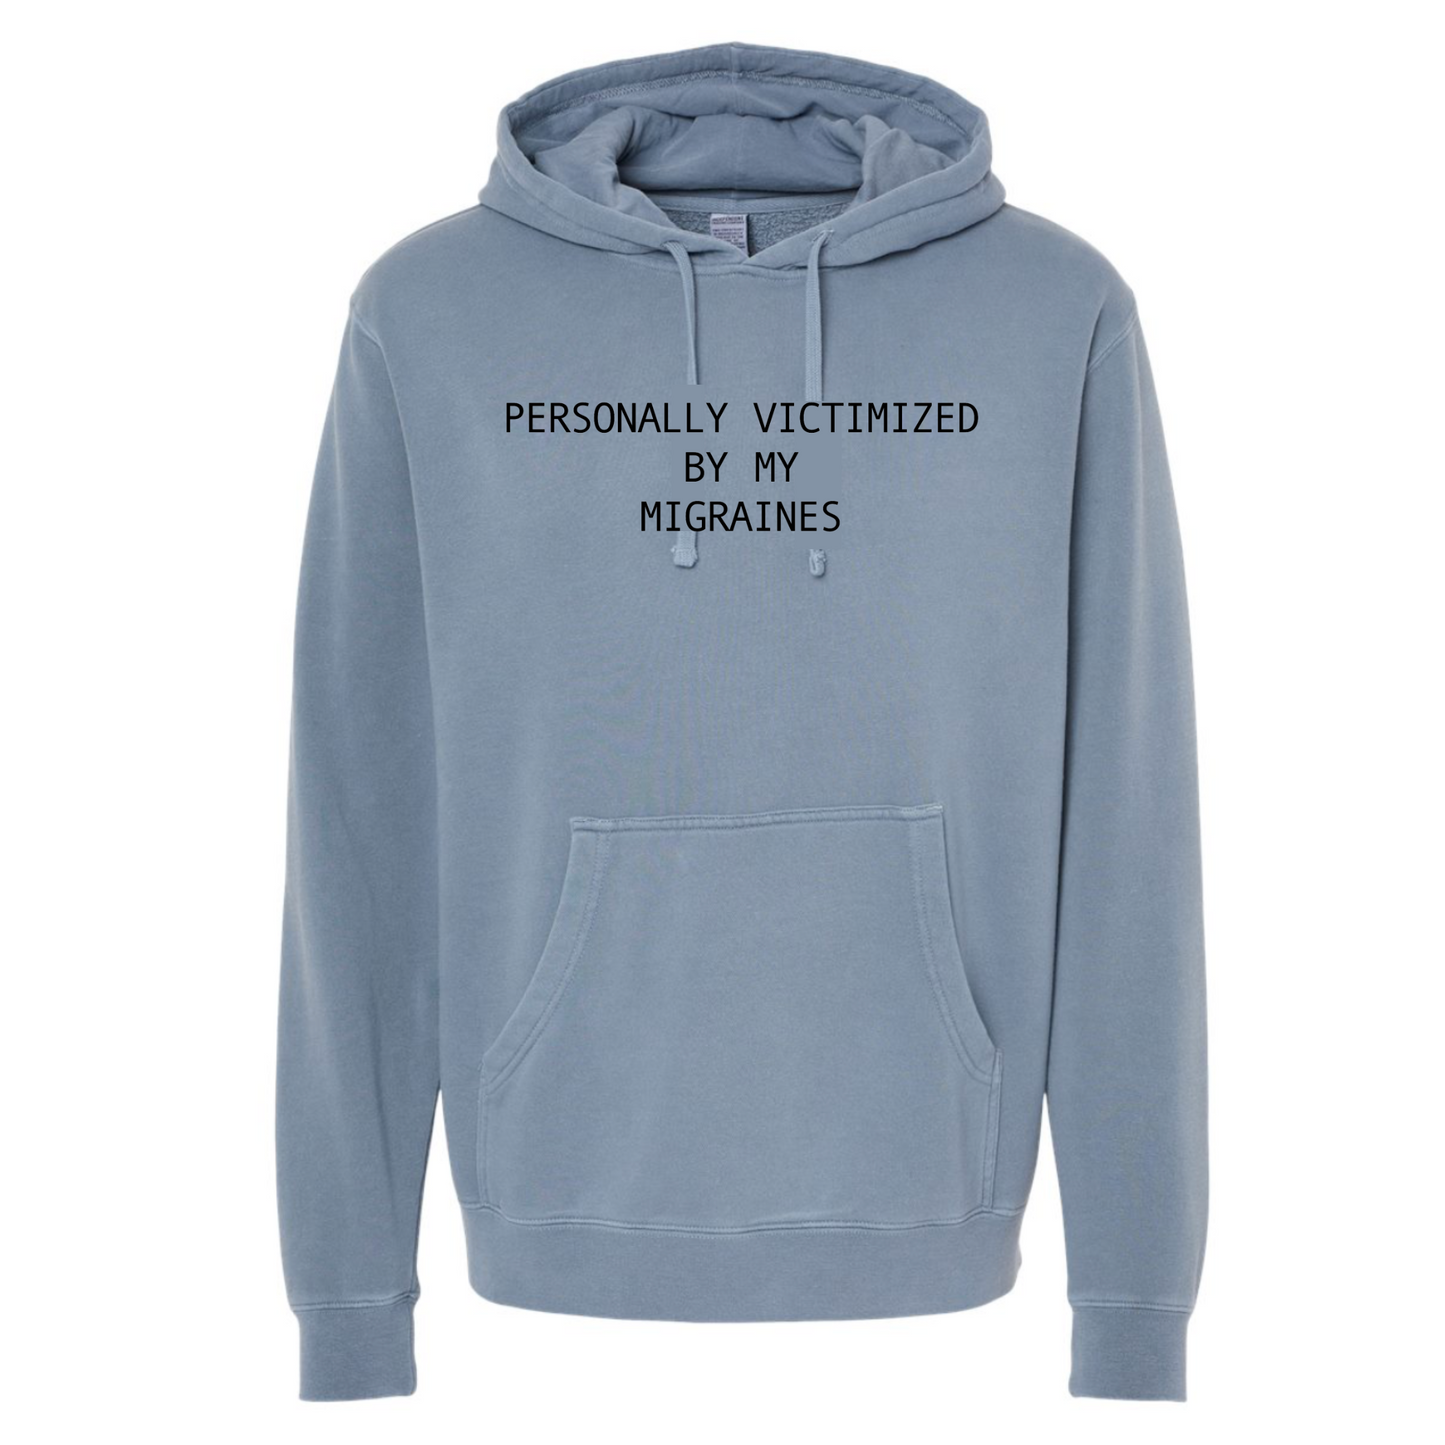 Personally Victimized By My Migraines Hoodie in blue - front view